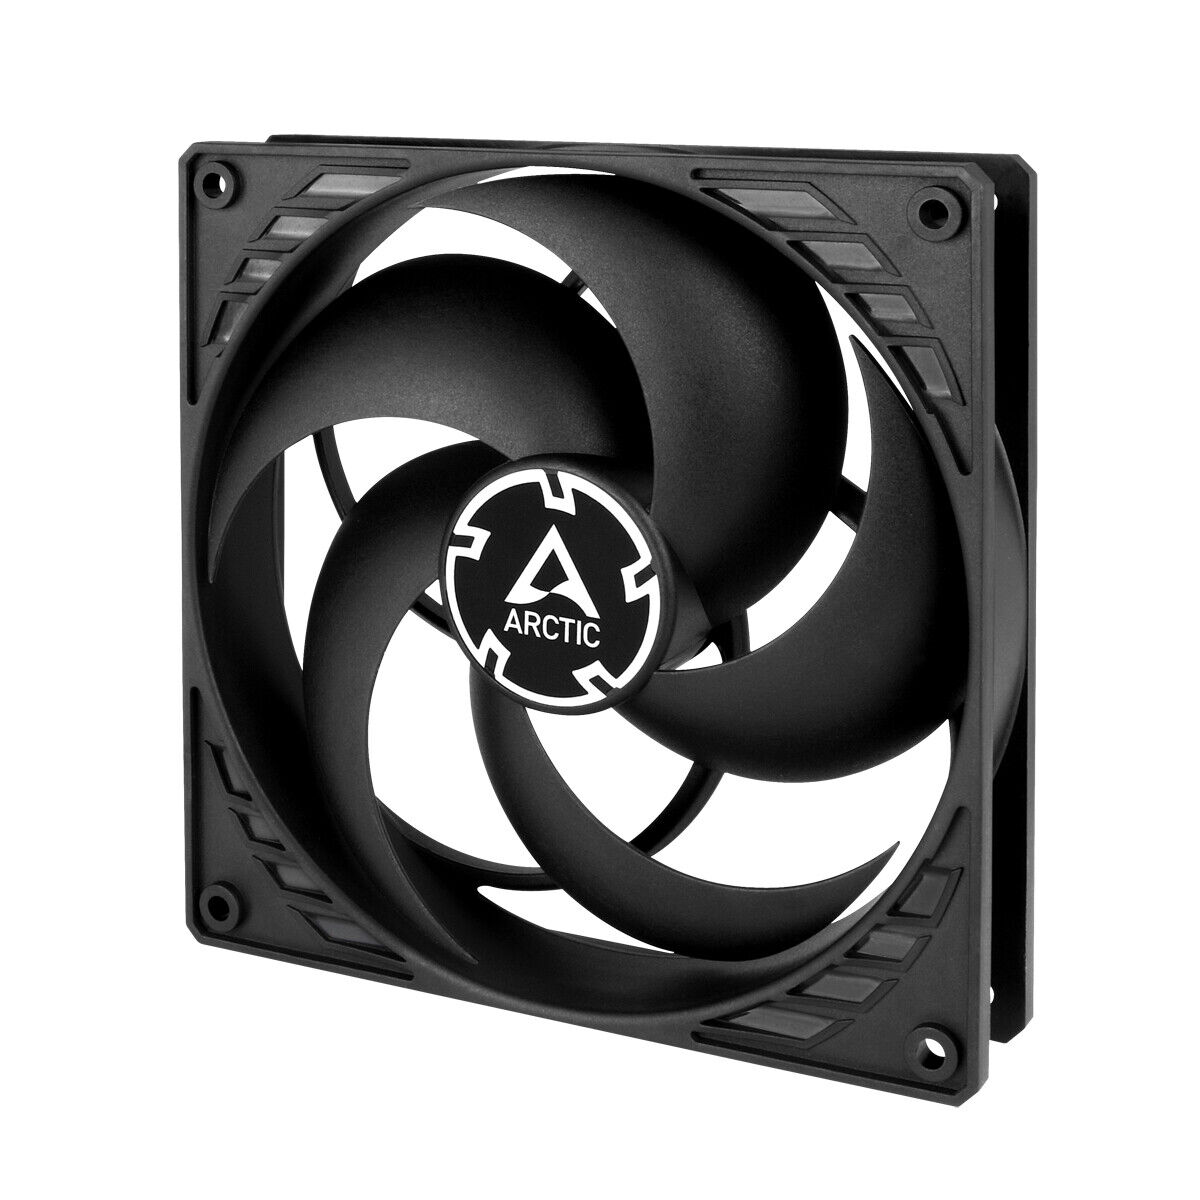 ARCTIC P14 PWM PST (Black) 140 mm Case Fan with PWM Sharing Technology PST PC